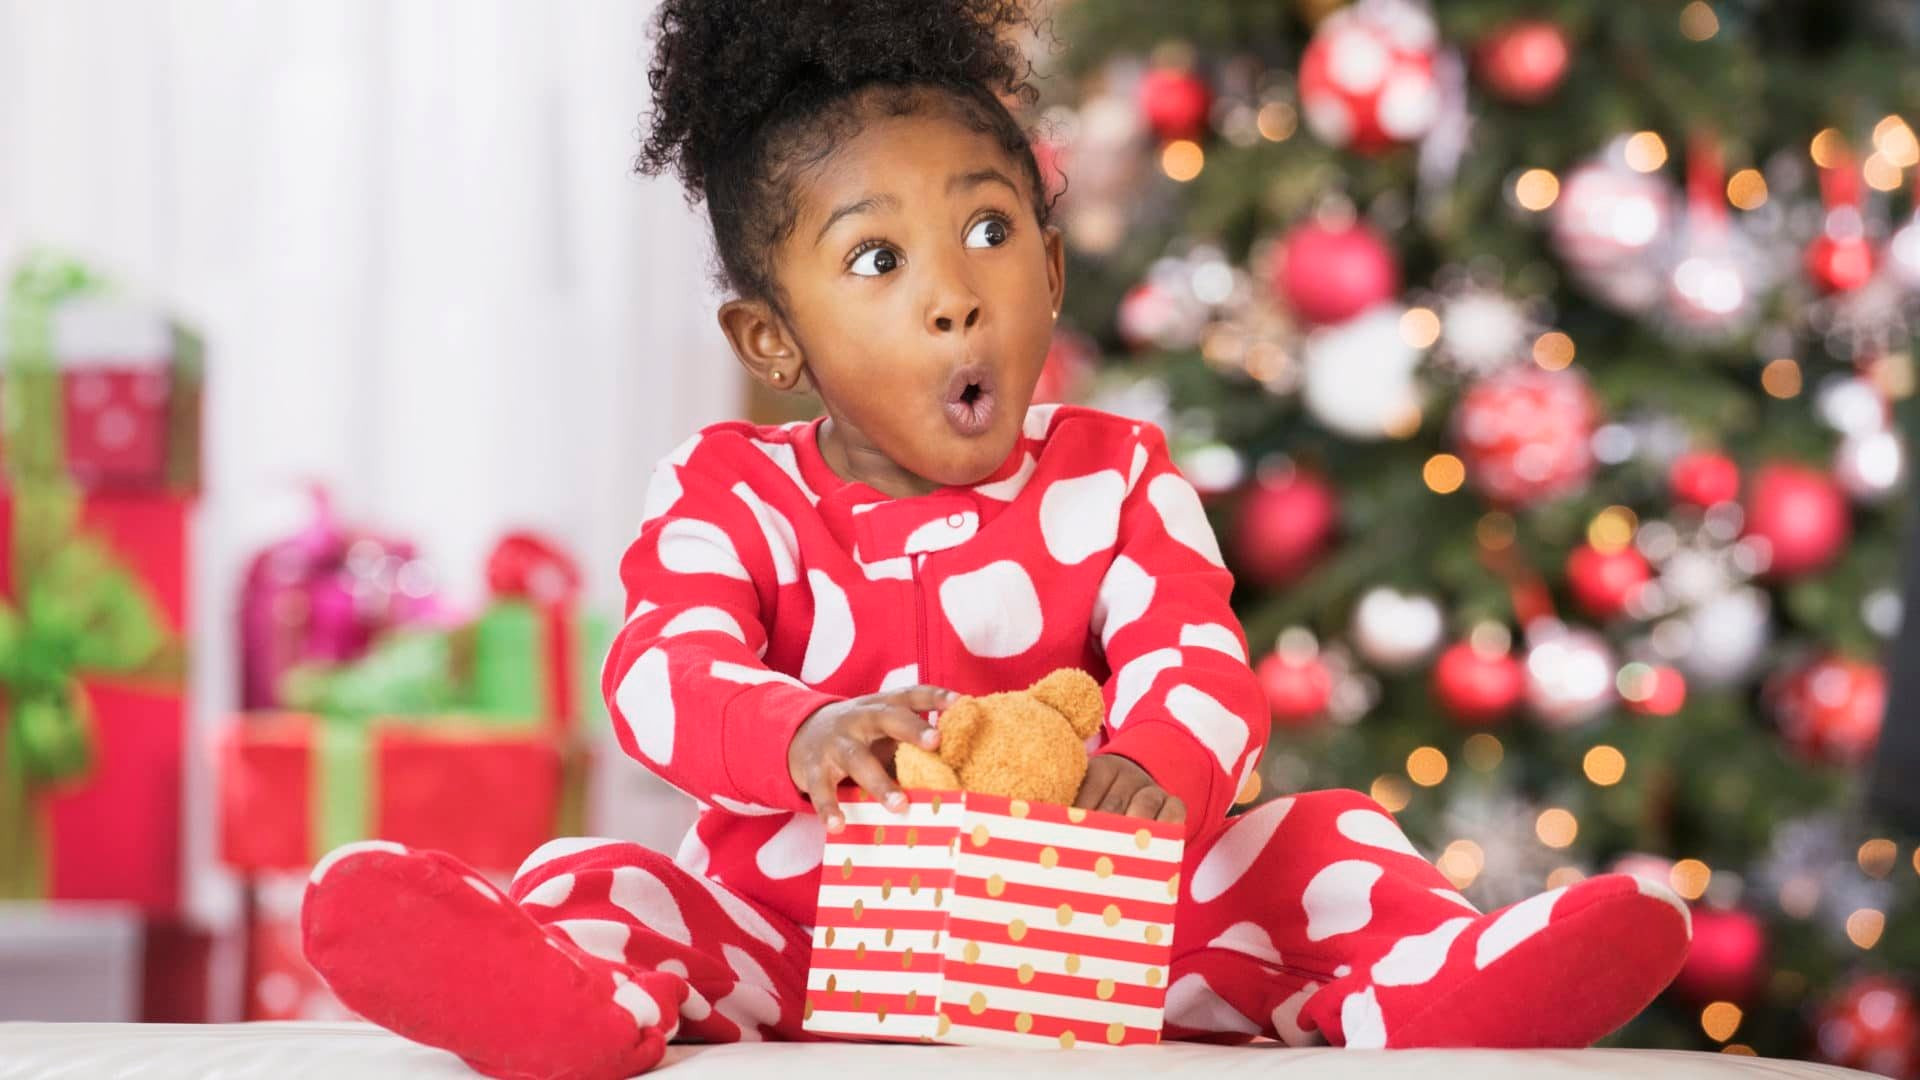 Child Christmas Gift
 The Best Last Minute Christmas Gift Ideas for Kids at